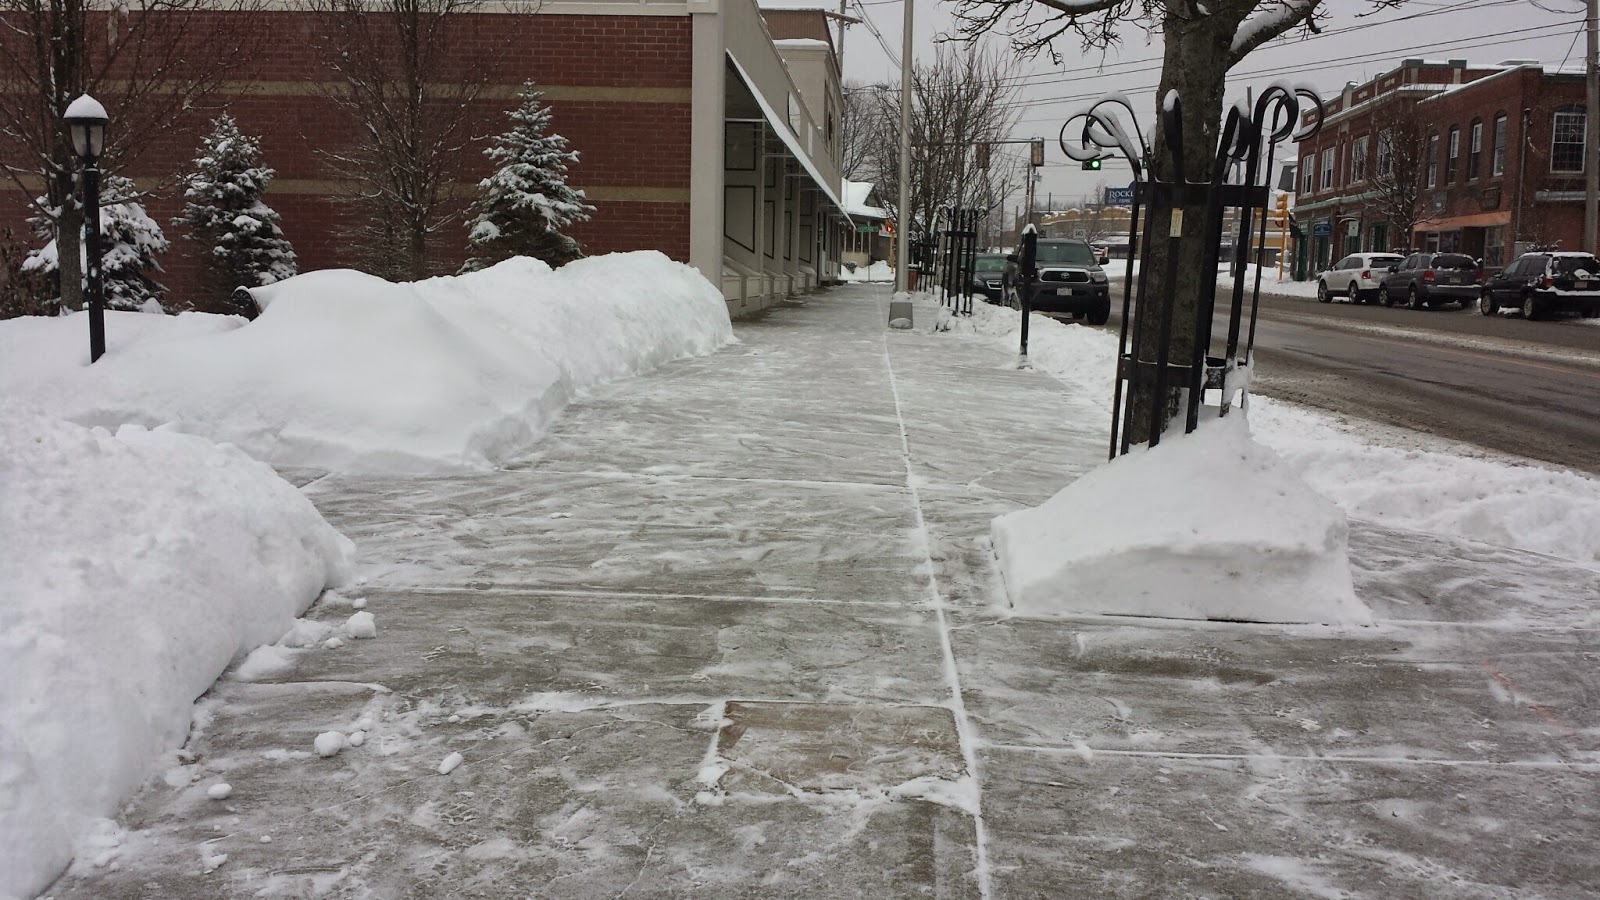 another sample sidewalk photo, this from early Sunday morning Feb 8th